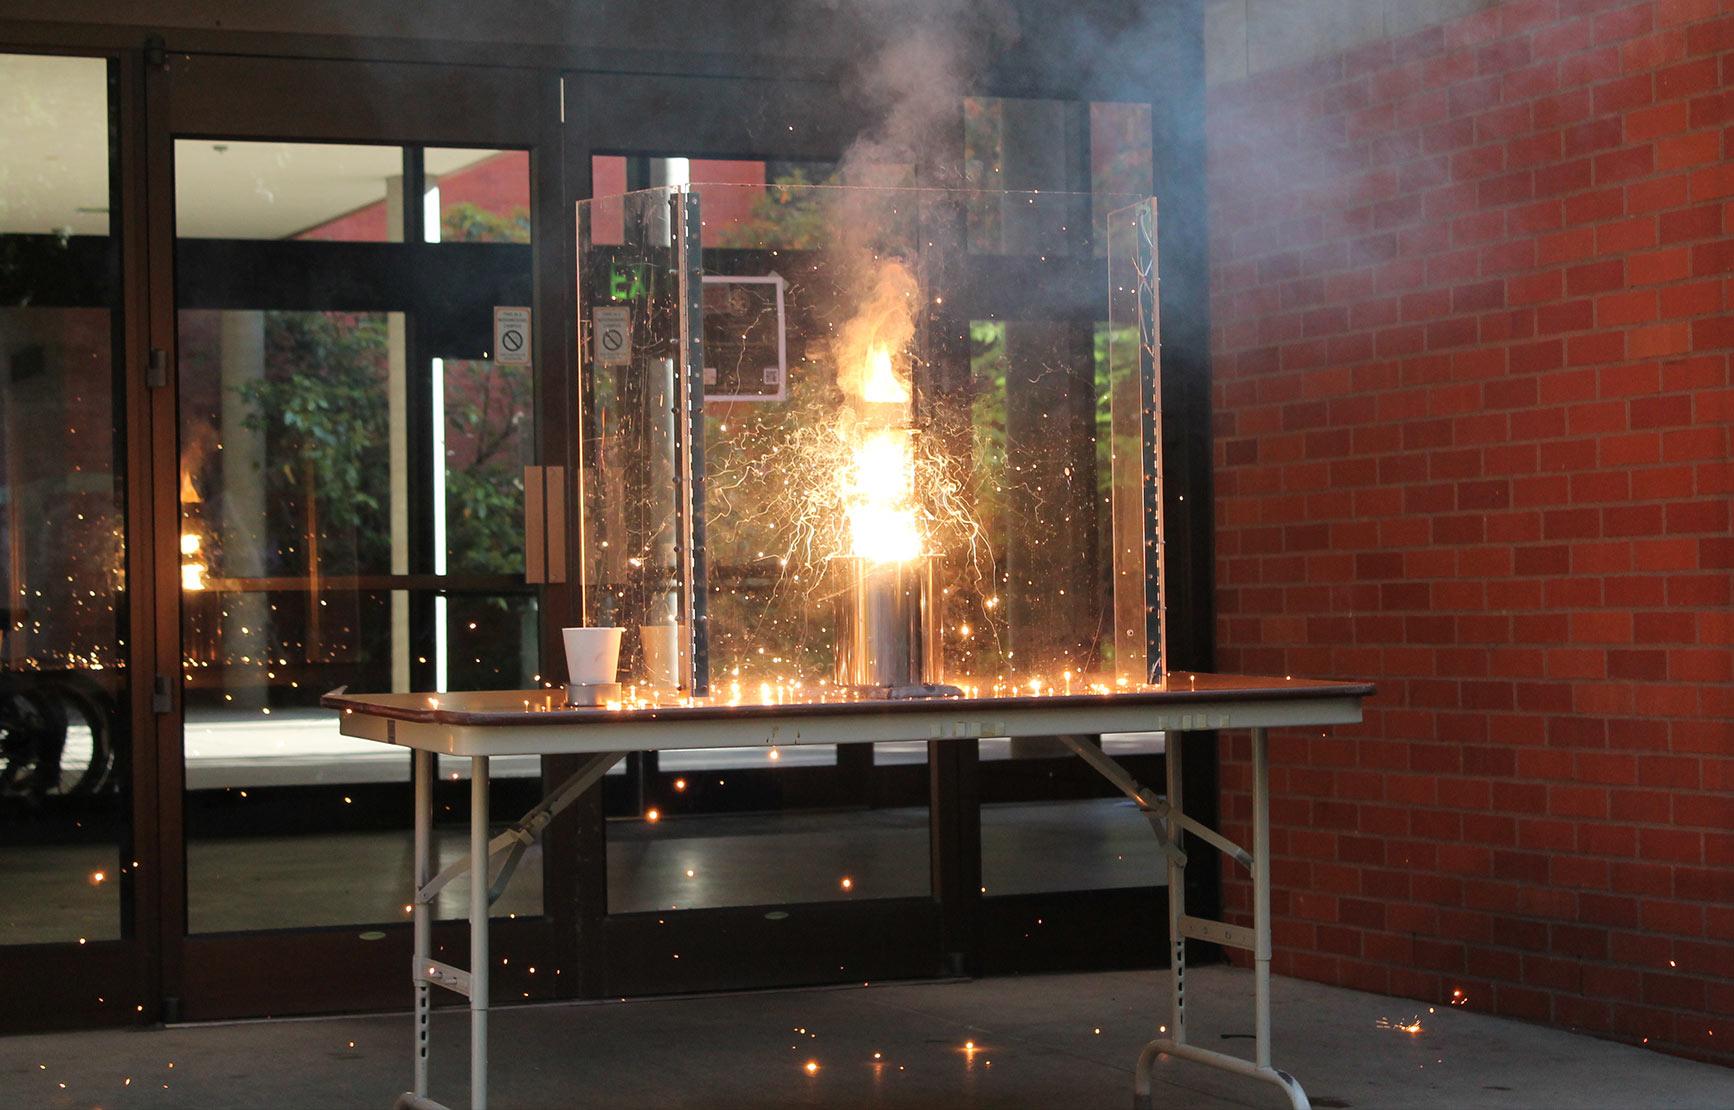 A controlled small fiery explosion during a chemistry experiment.